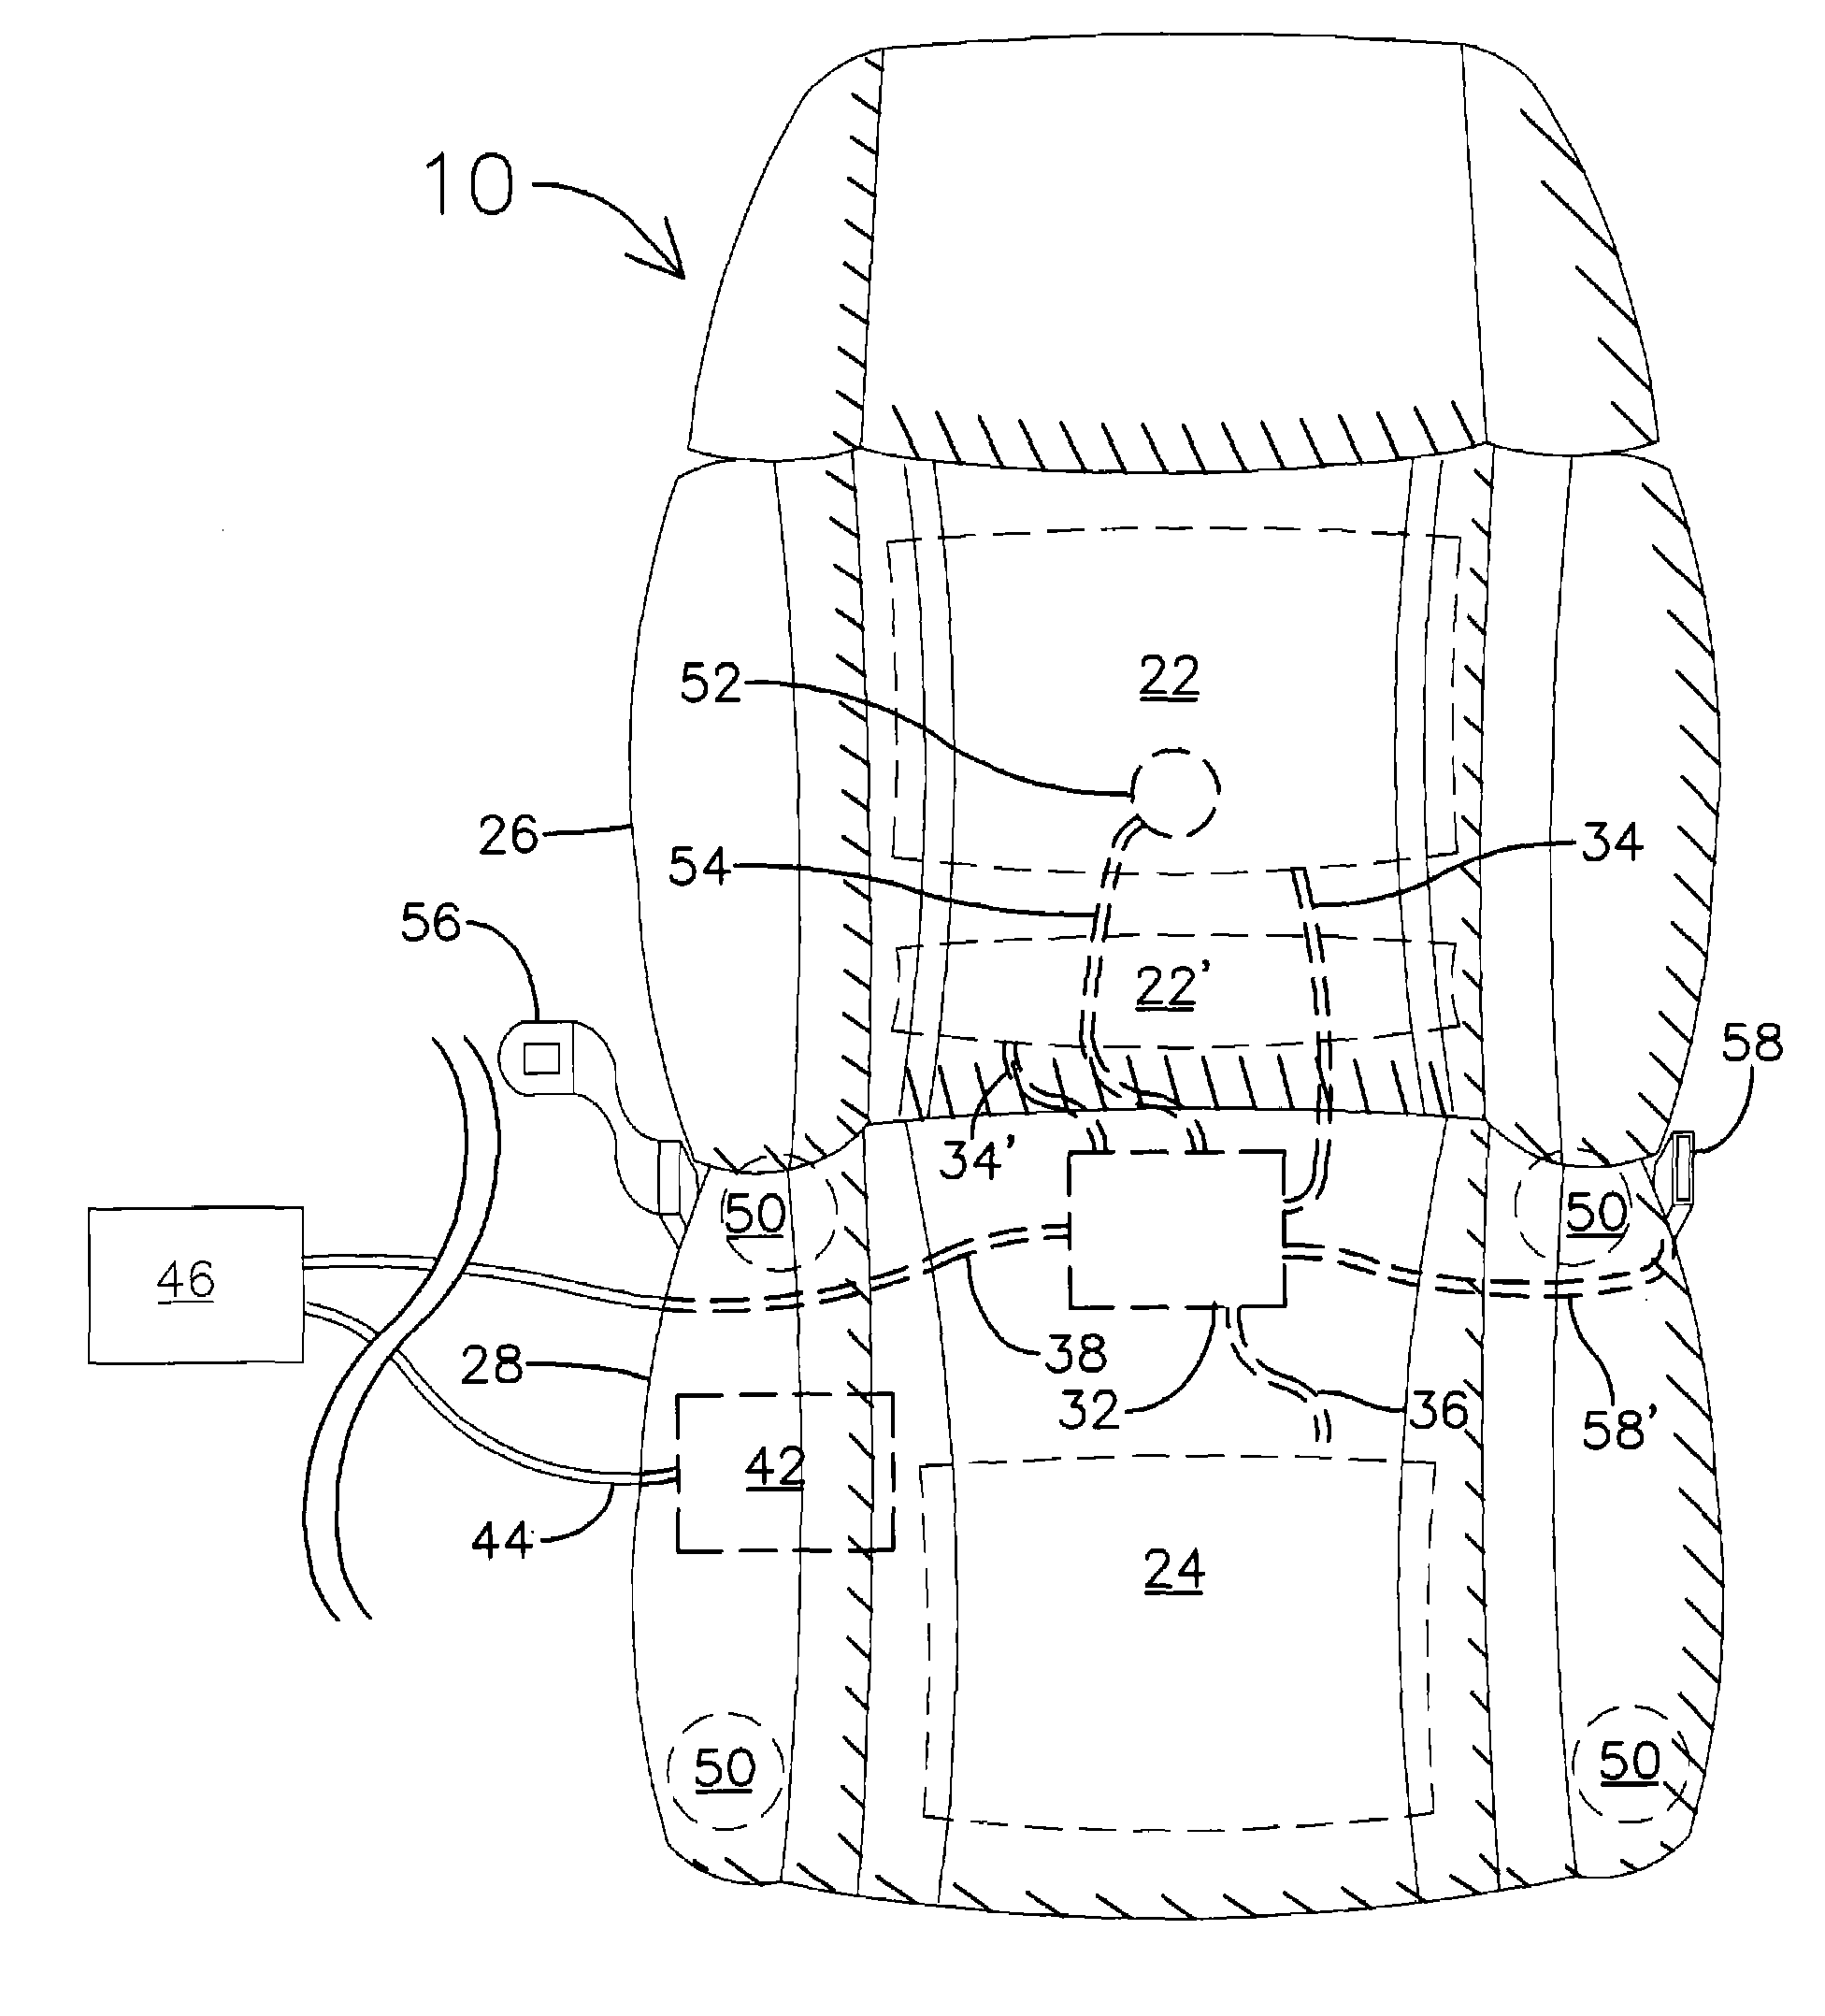 Vehicle occupant presence and position sensing system